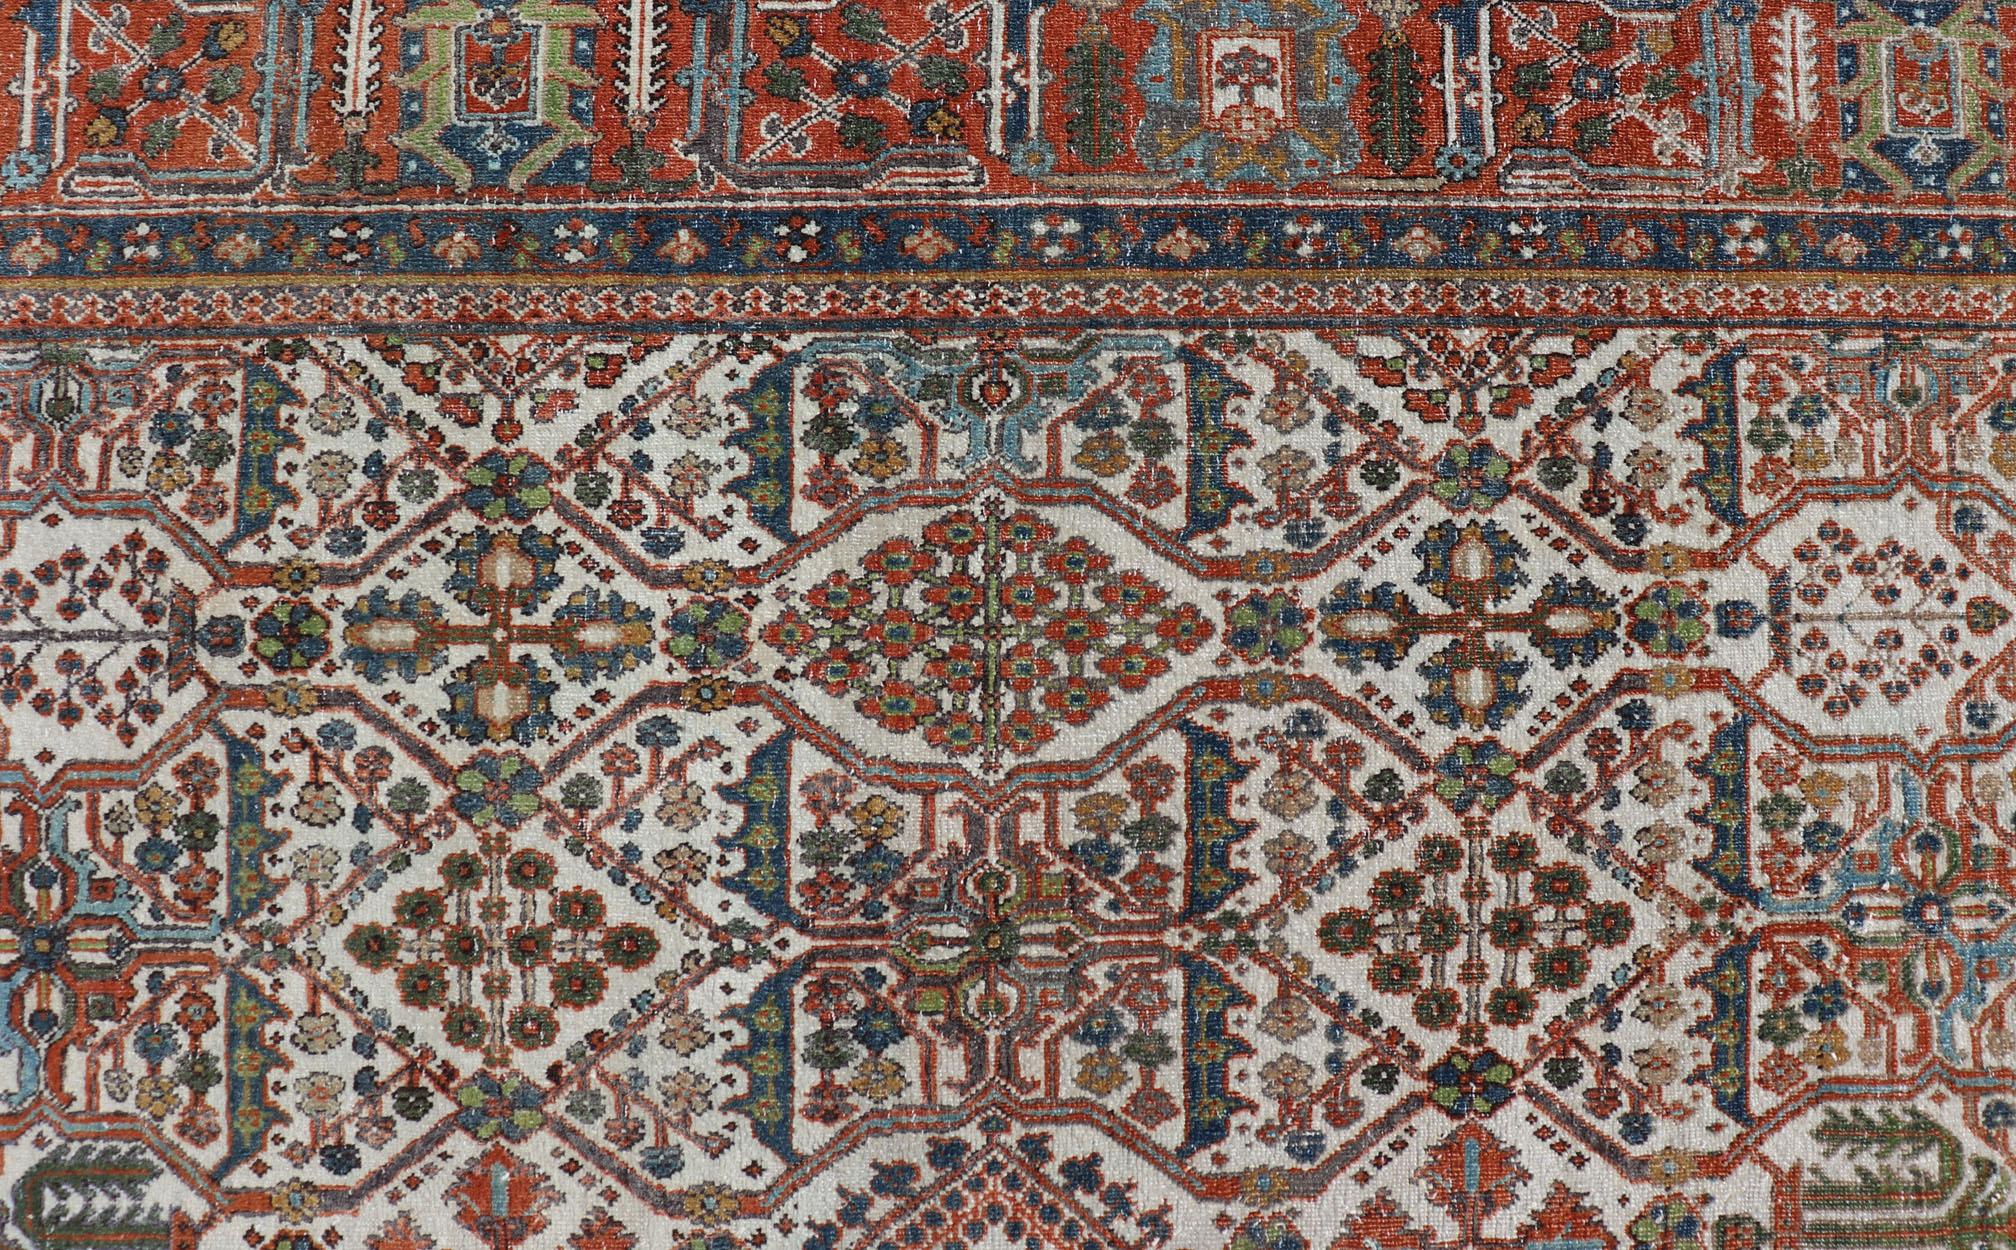 Measures: 7'10 x 10'9 
Antique Persian Joshegan Rug in Ivory Background With Blue, Green, & Copper. Keivan Woven Arts/ rugEN-15157, country of origin / type: Iran / Joshegan, circa 1920

Antique Persian Joshegan Rug in Ivory Background with copper,